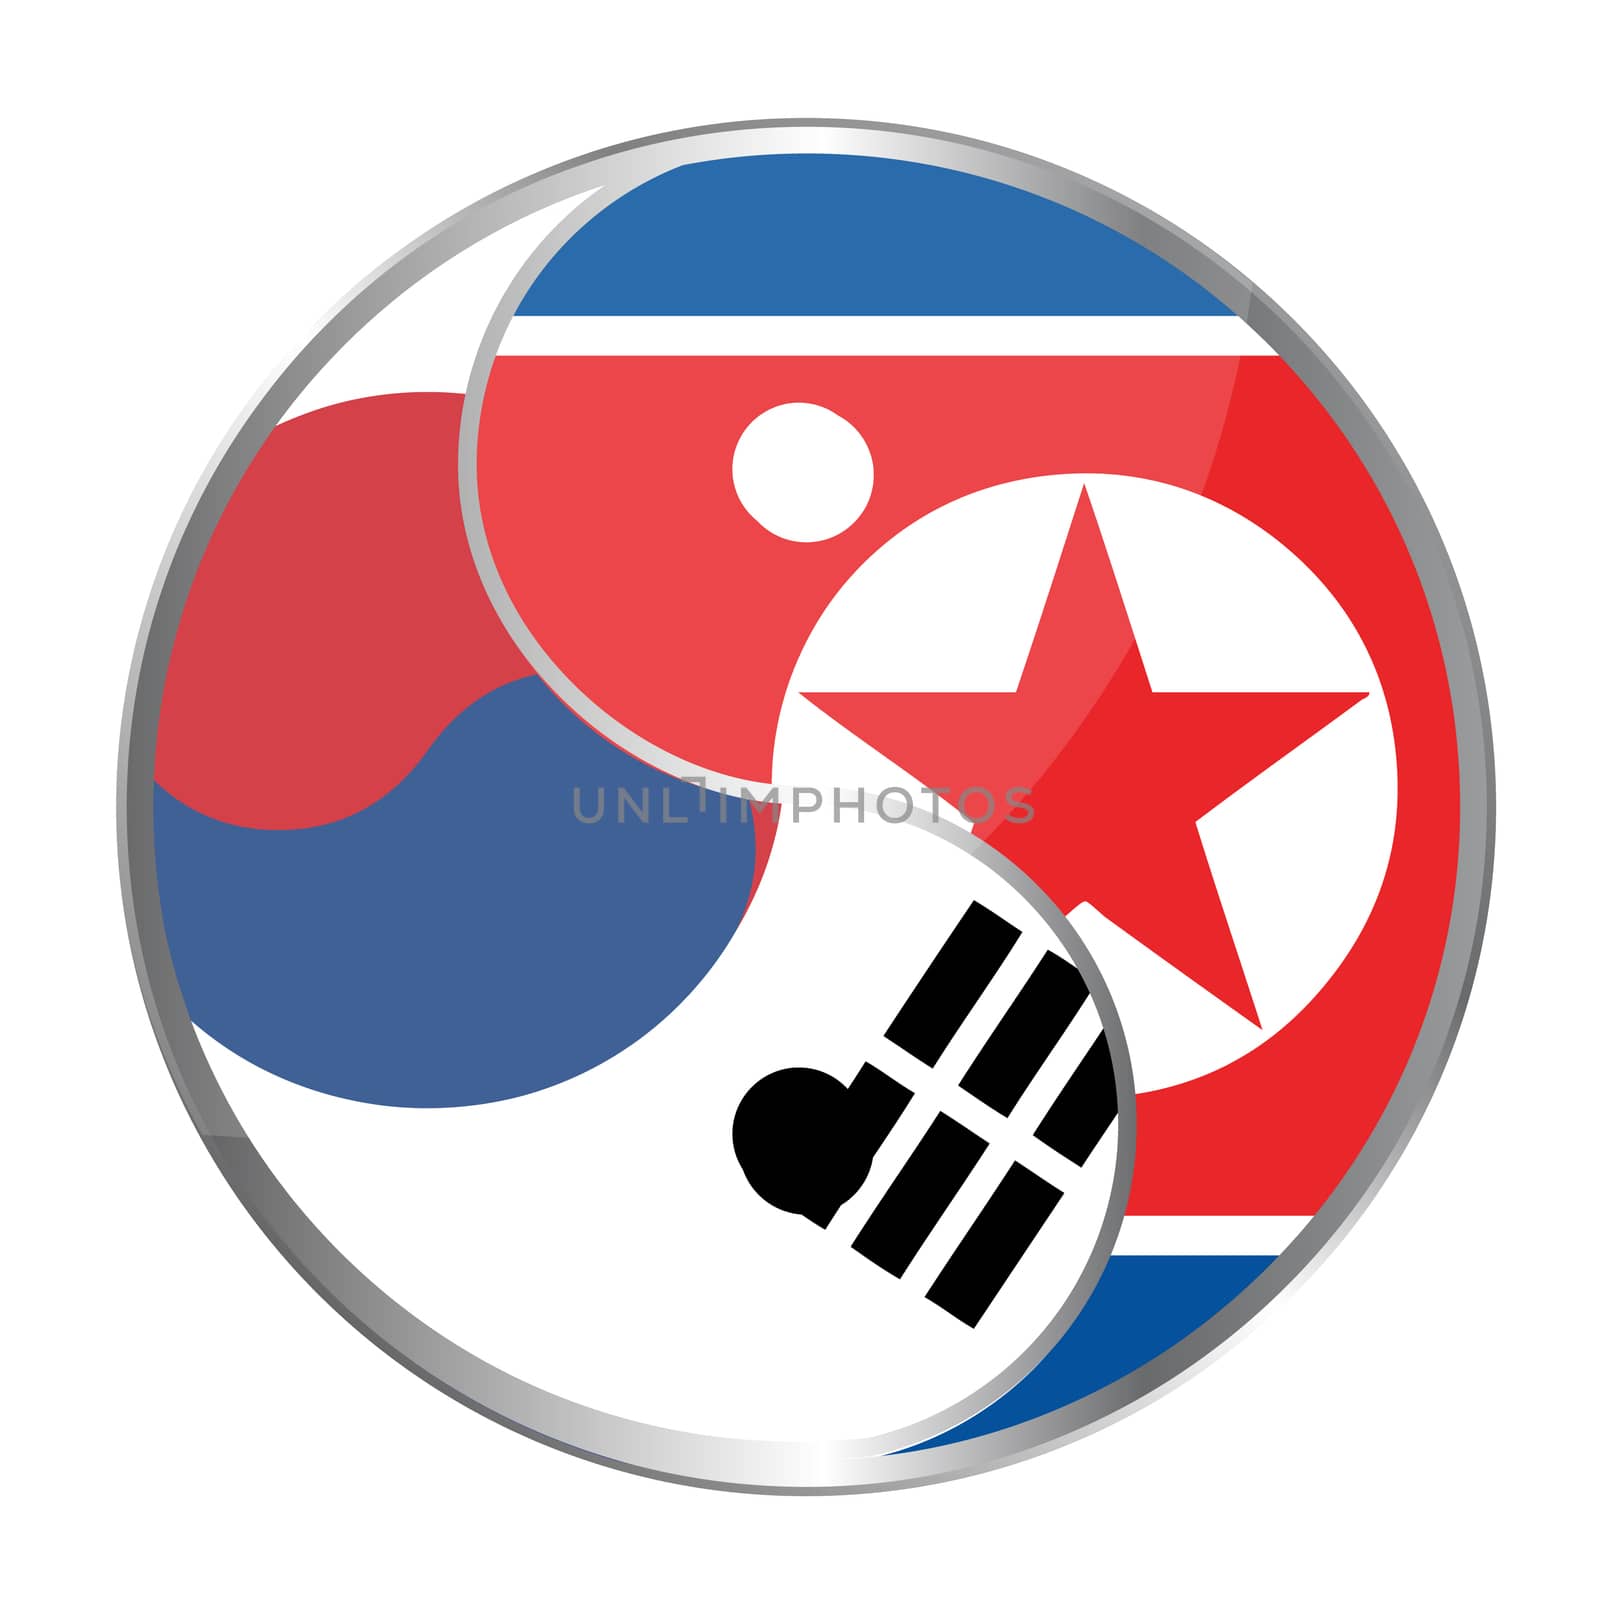 Ying yan symbol with the North Korea and South korea flags.